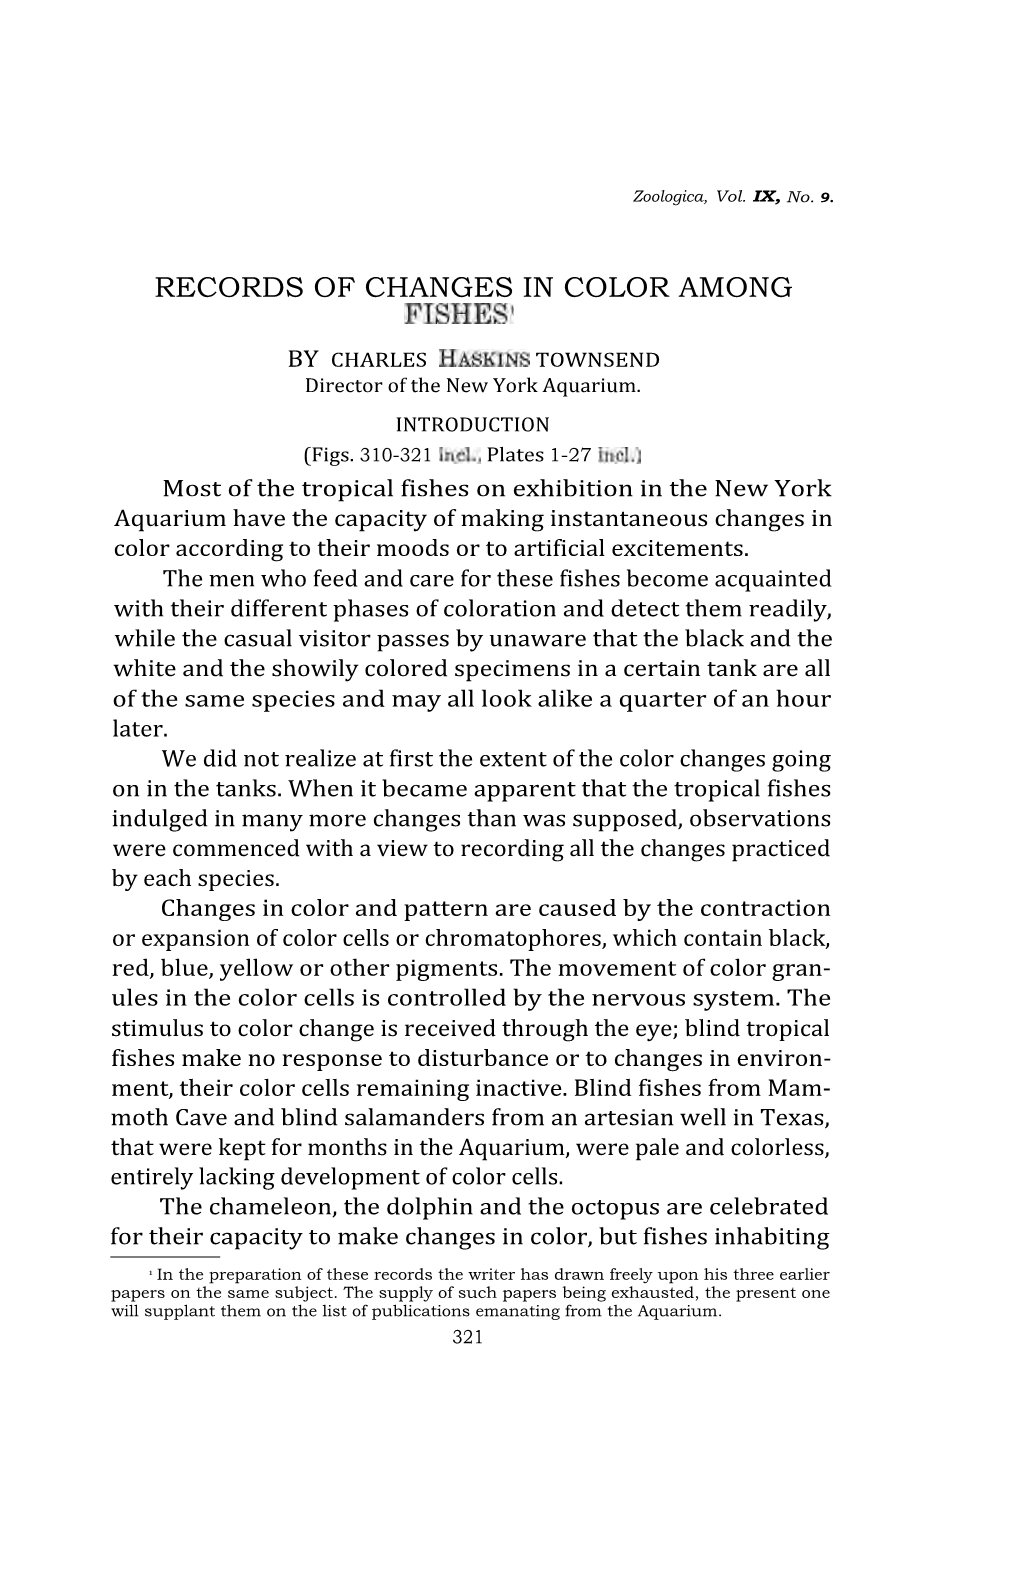 RECORDS of CHANGES in COLOR AMONG FISHES' by CHARLES HASKINS TOWNSEND Director of the New York Aquarium